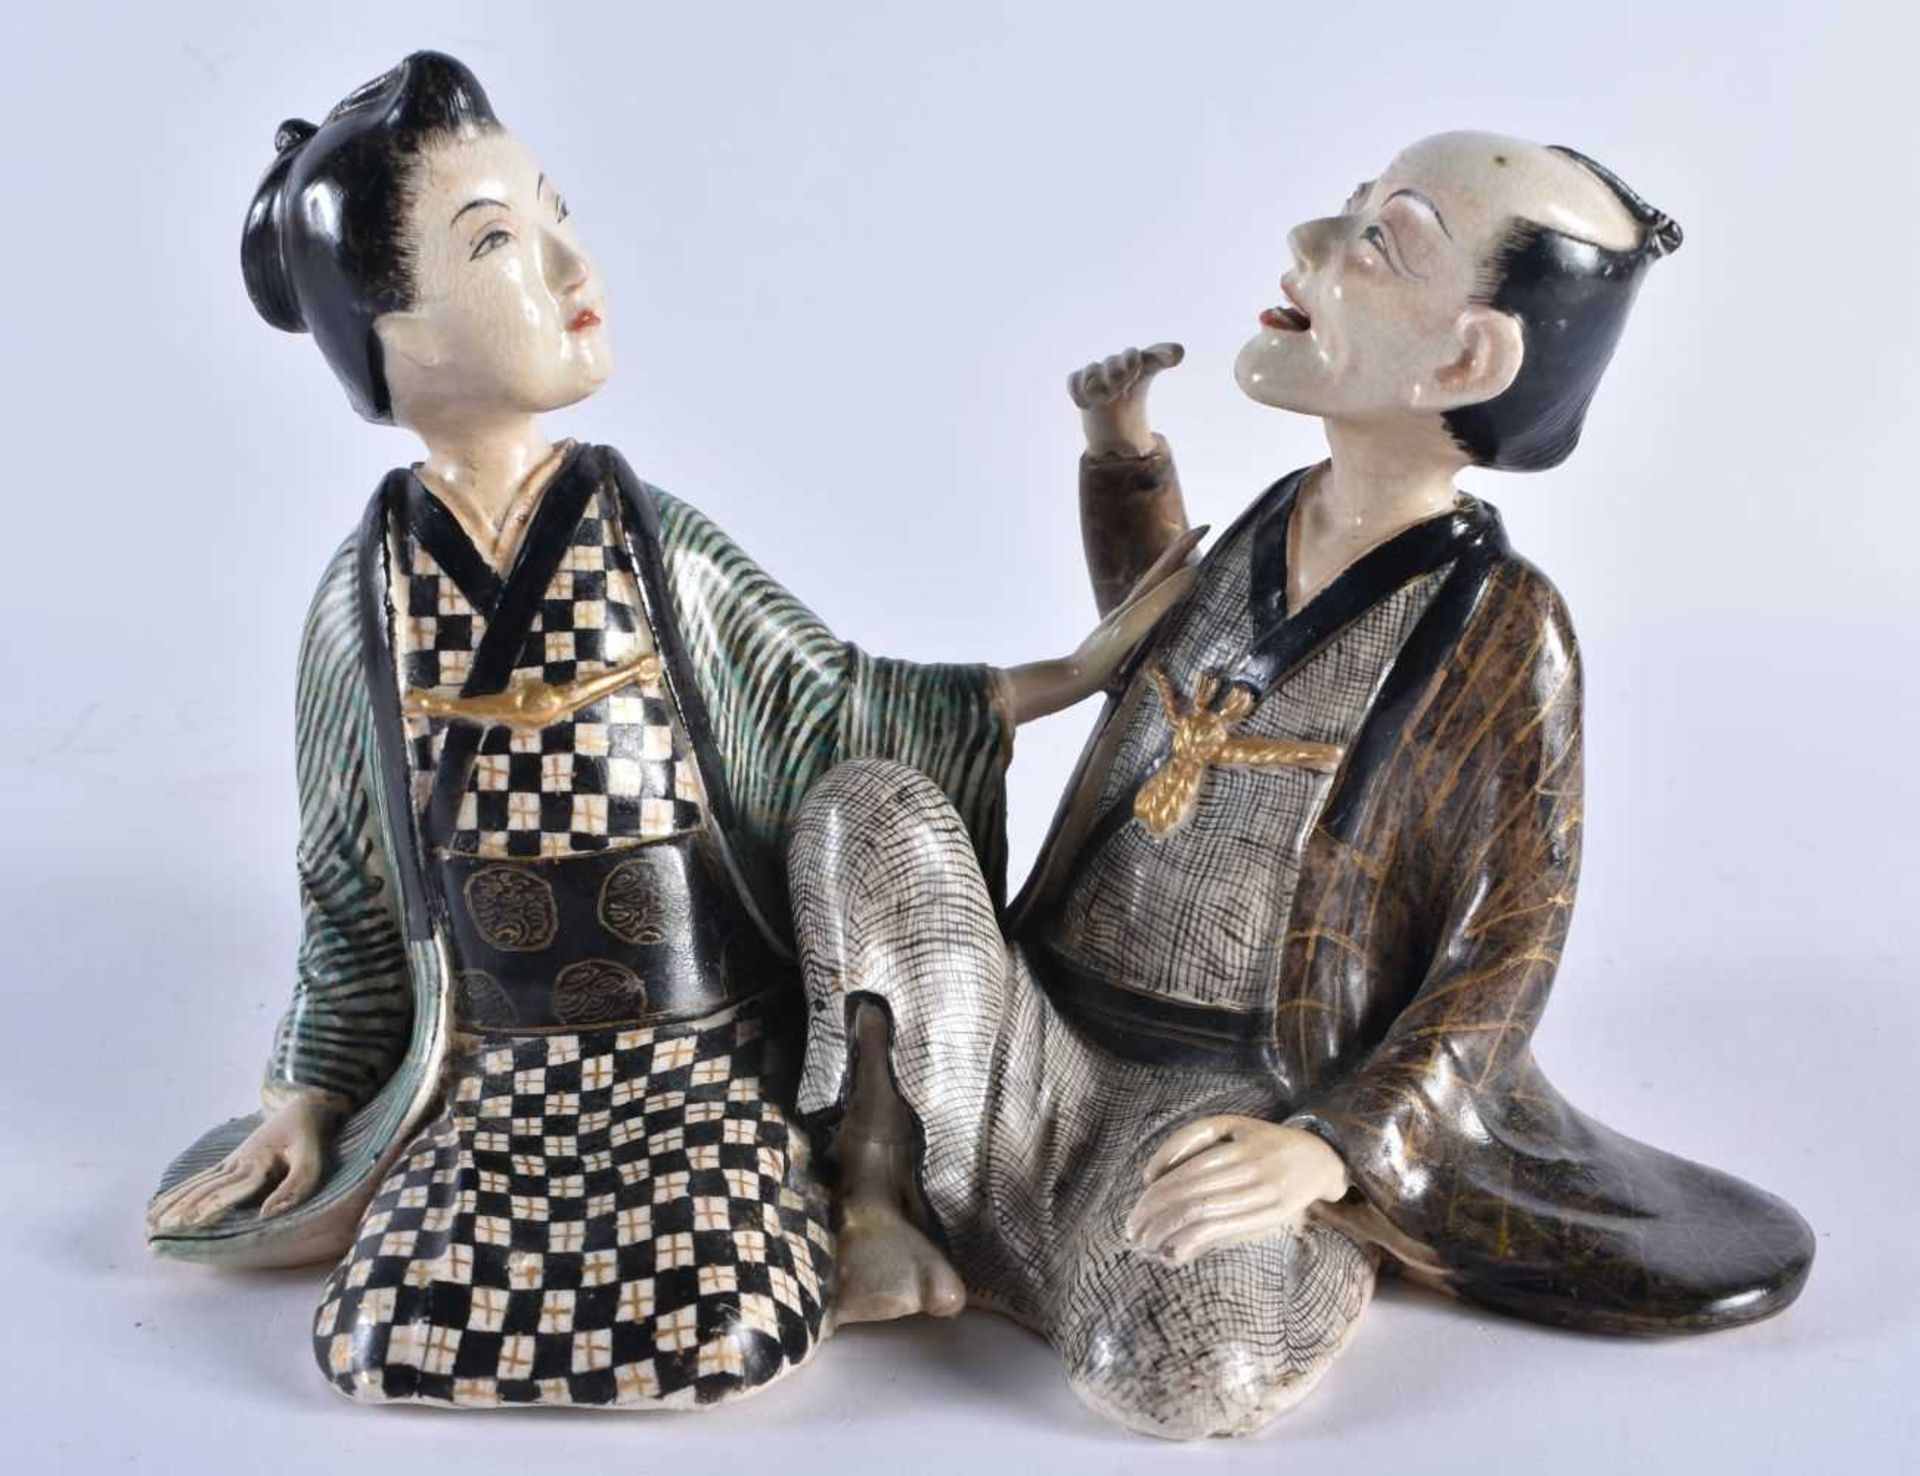 AN UNUSUAL 19TH CENTURY JAPANESE MEIJI PERIOD PORCELAIN FIGURE formed as a male and female. 15 cm